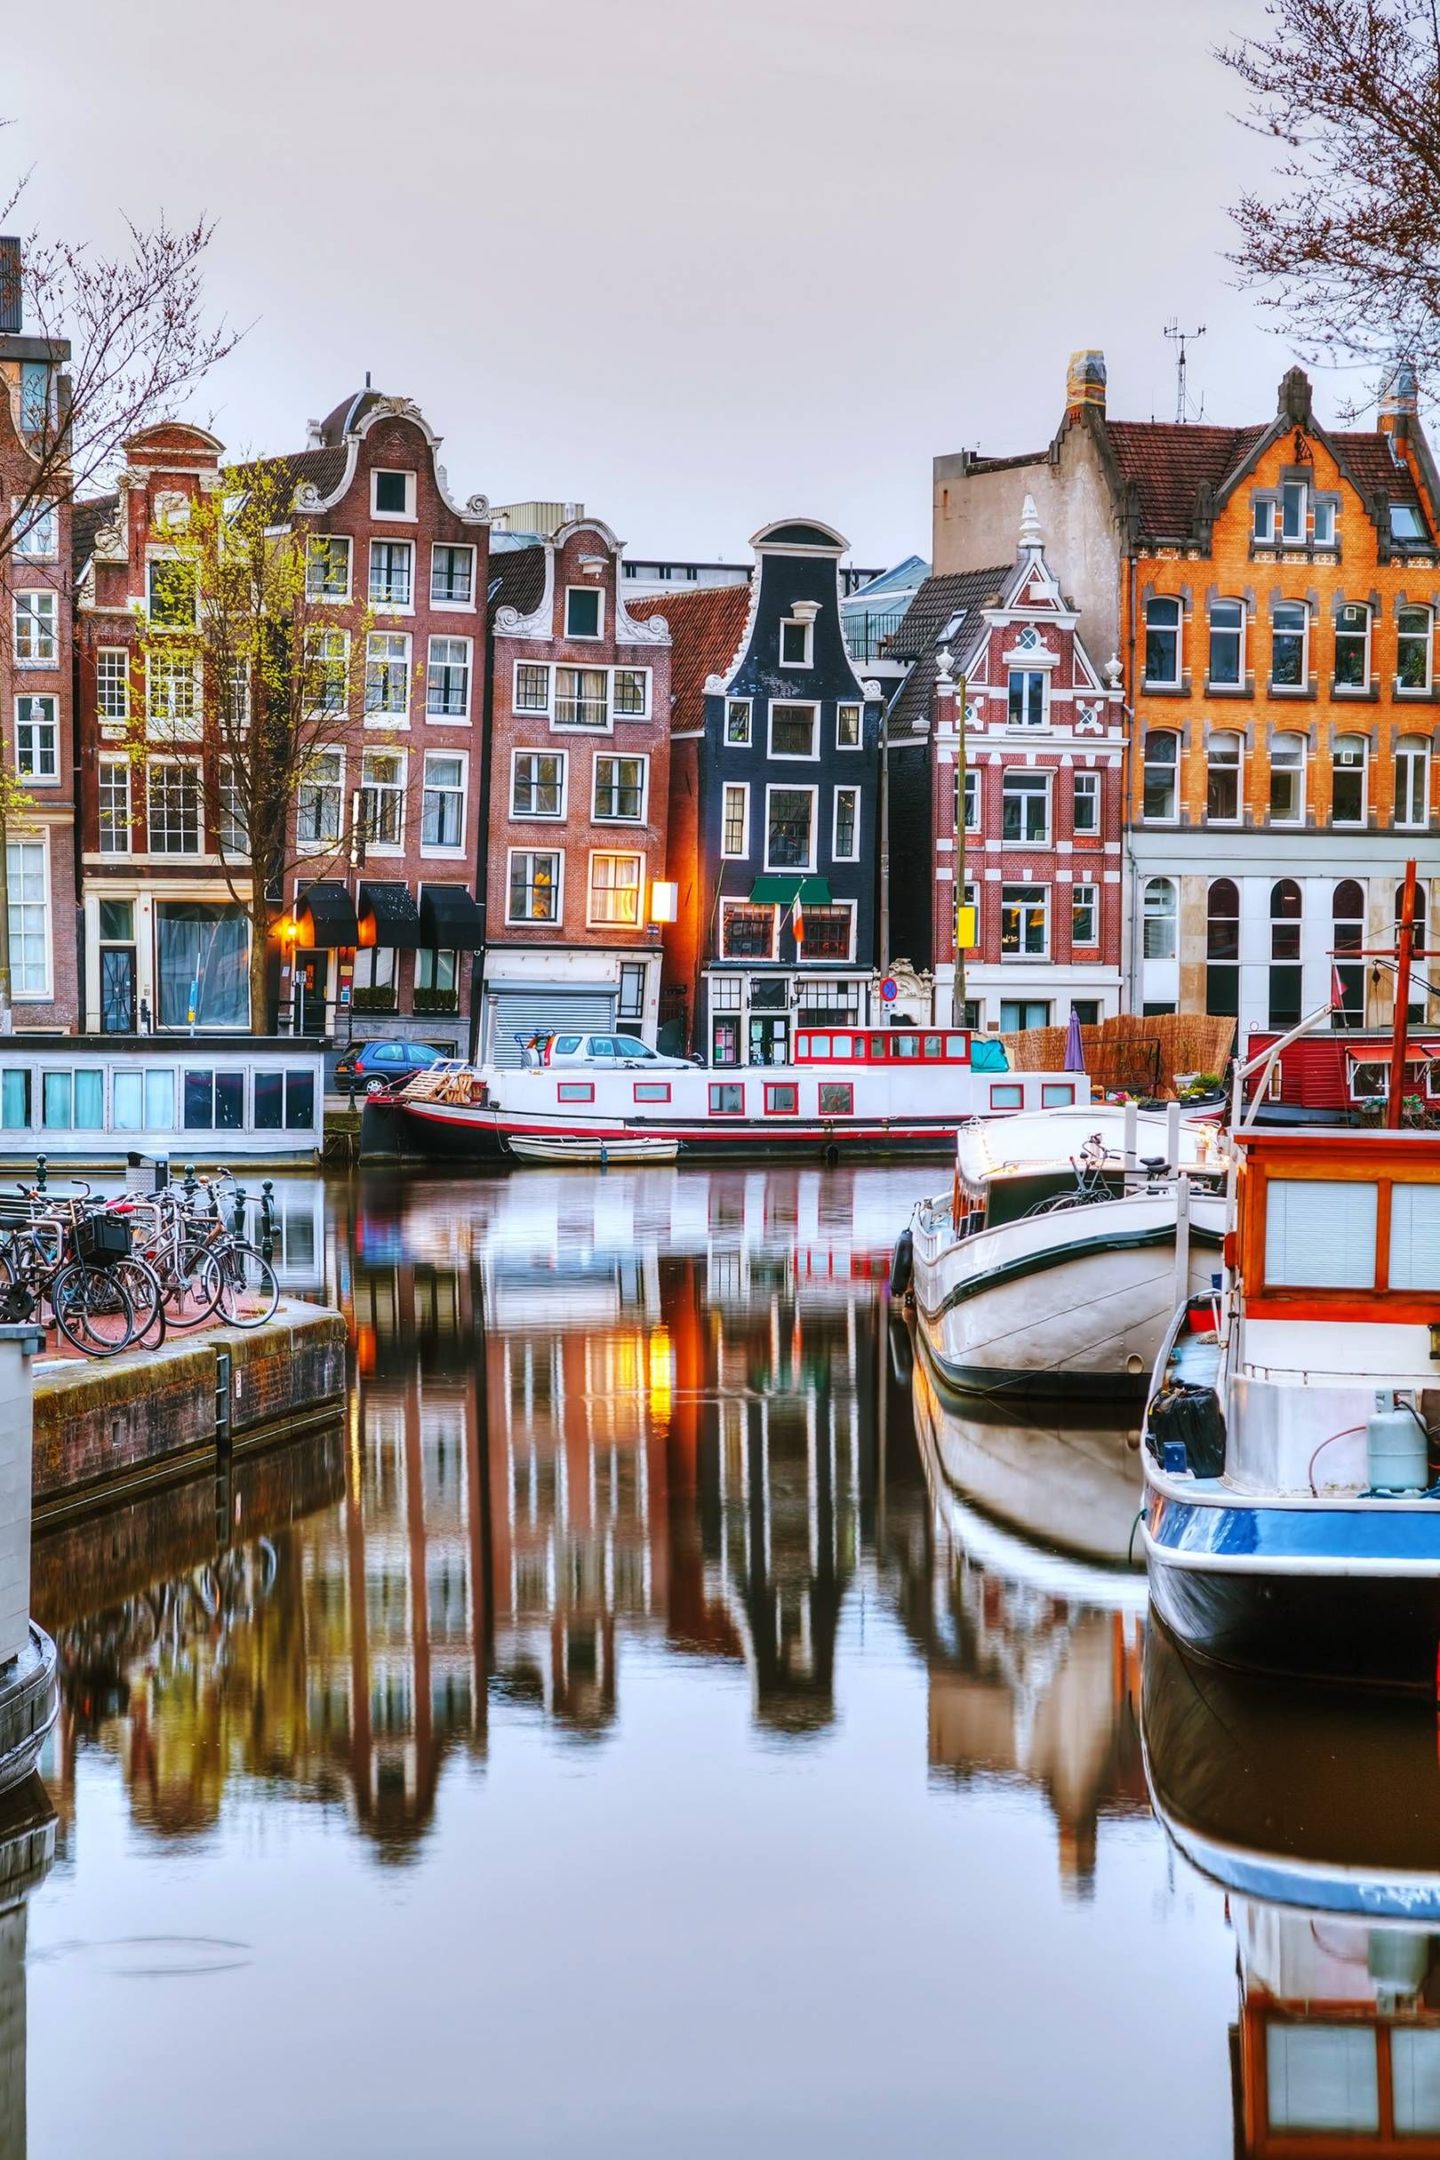 Amsterdams colourful canals make this a city worthy of an instagram post or two